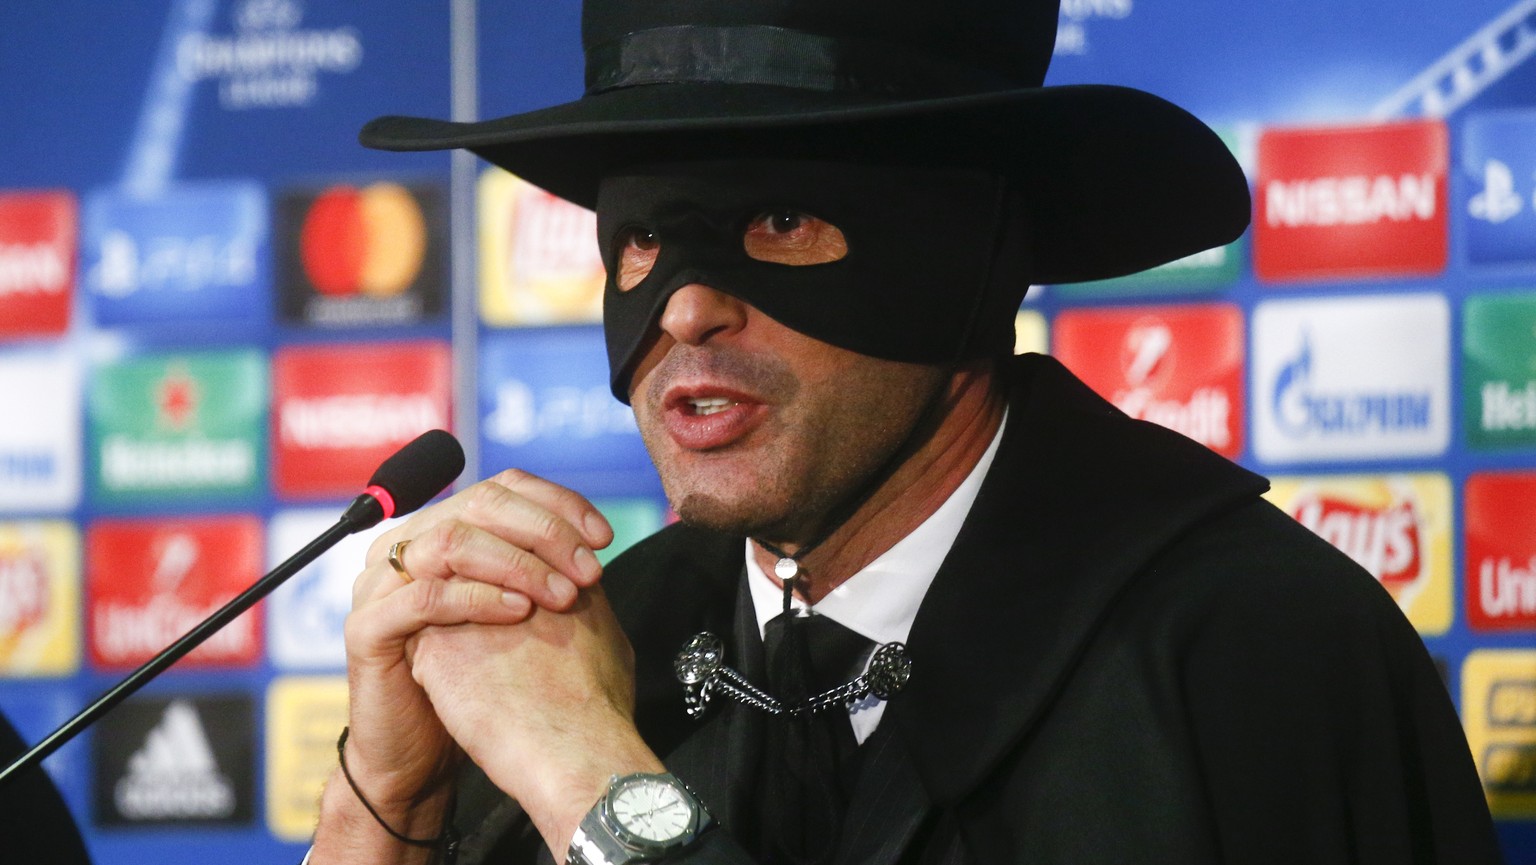 Shakthtar coach Paulo Fonseca, dressed as fictional character Zorro attends a press conference after victory his team in the Champions League group F soccer match between Manchester City and Shakhtar  ...